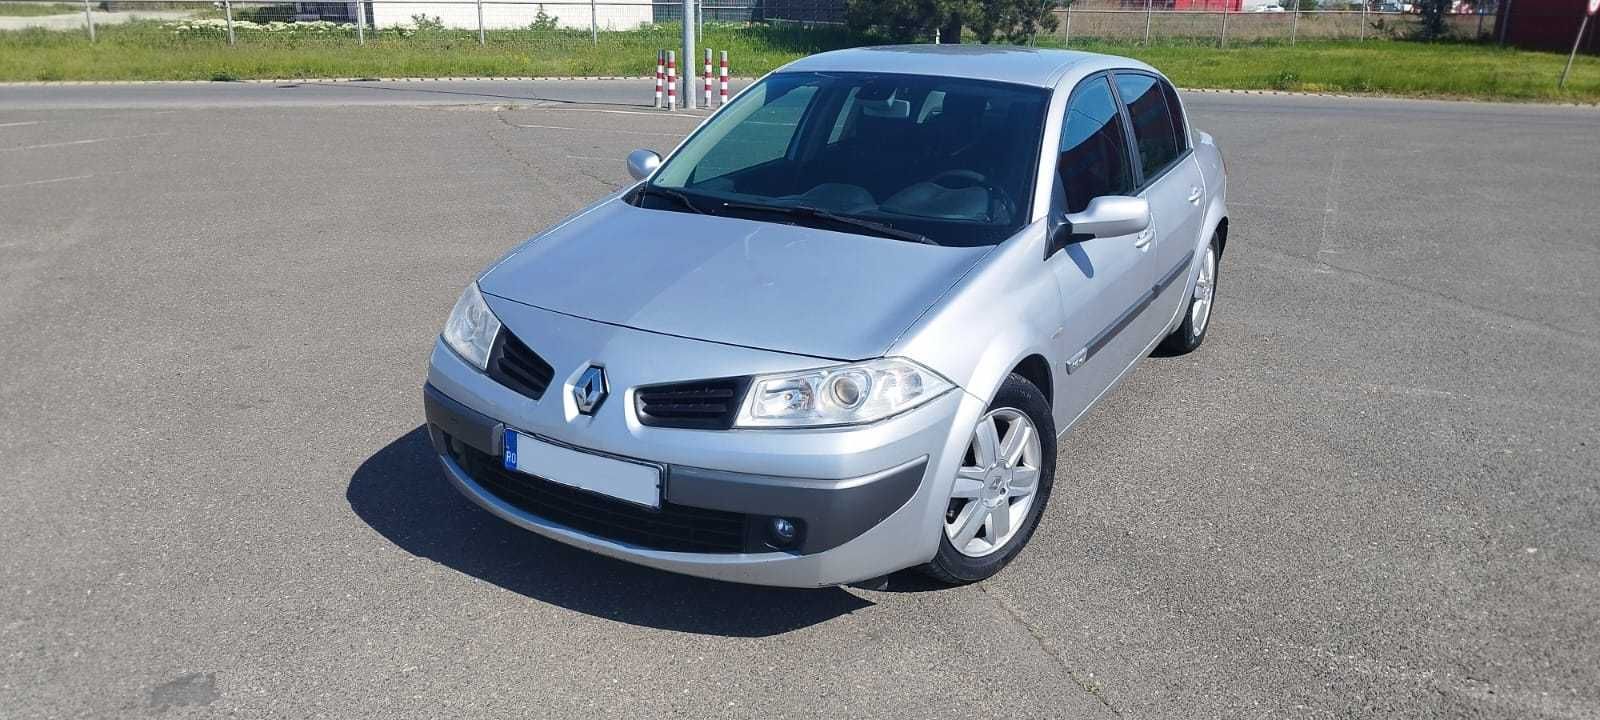 RENAULT Megane 09.2006 1.6i 111 CP E4 climatronic, inmatriculat/fiscal